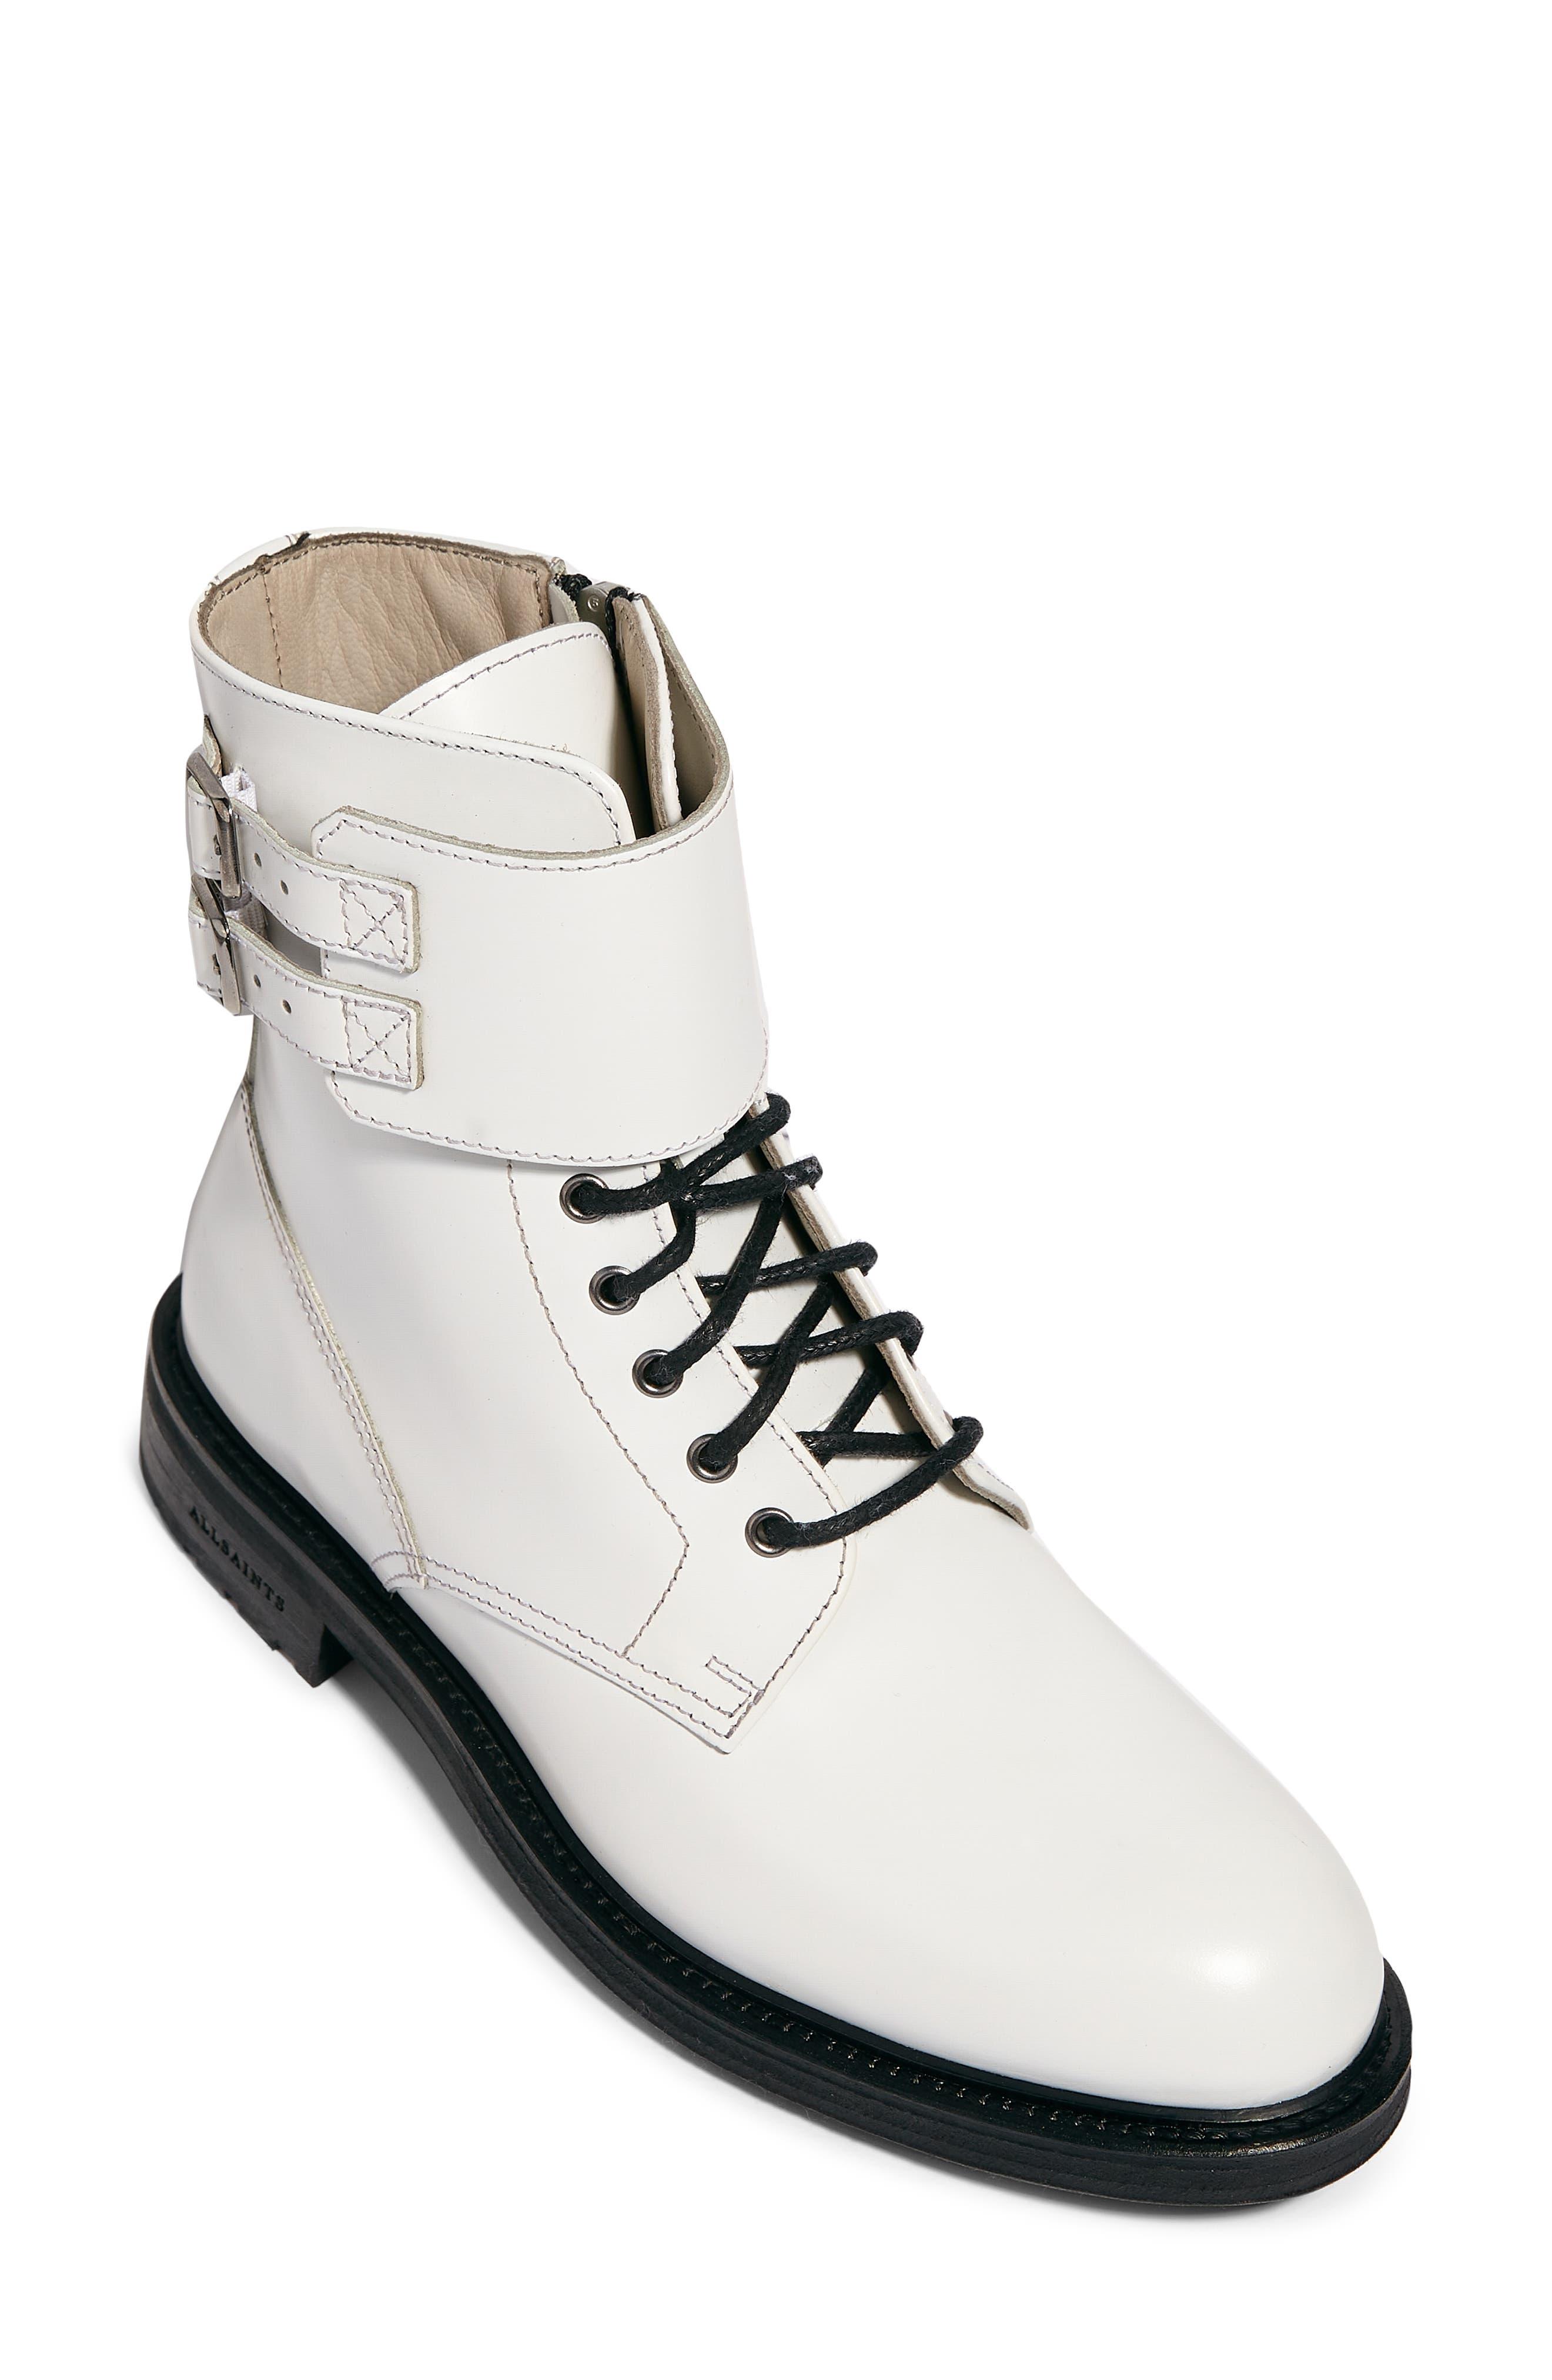 AllSaints Brigade Combat Boot In White Leather At Nordstrom Rack | Lyst